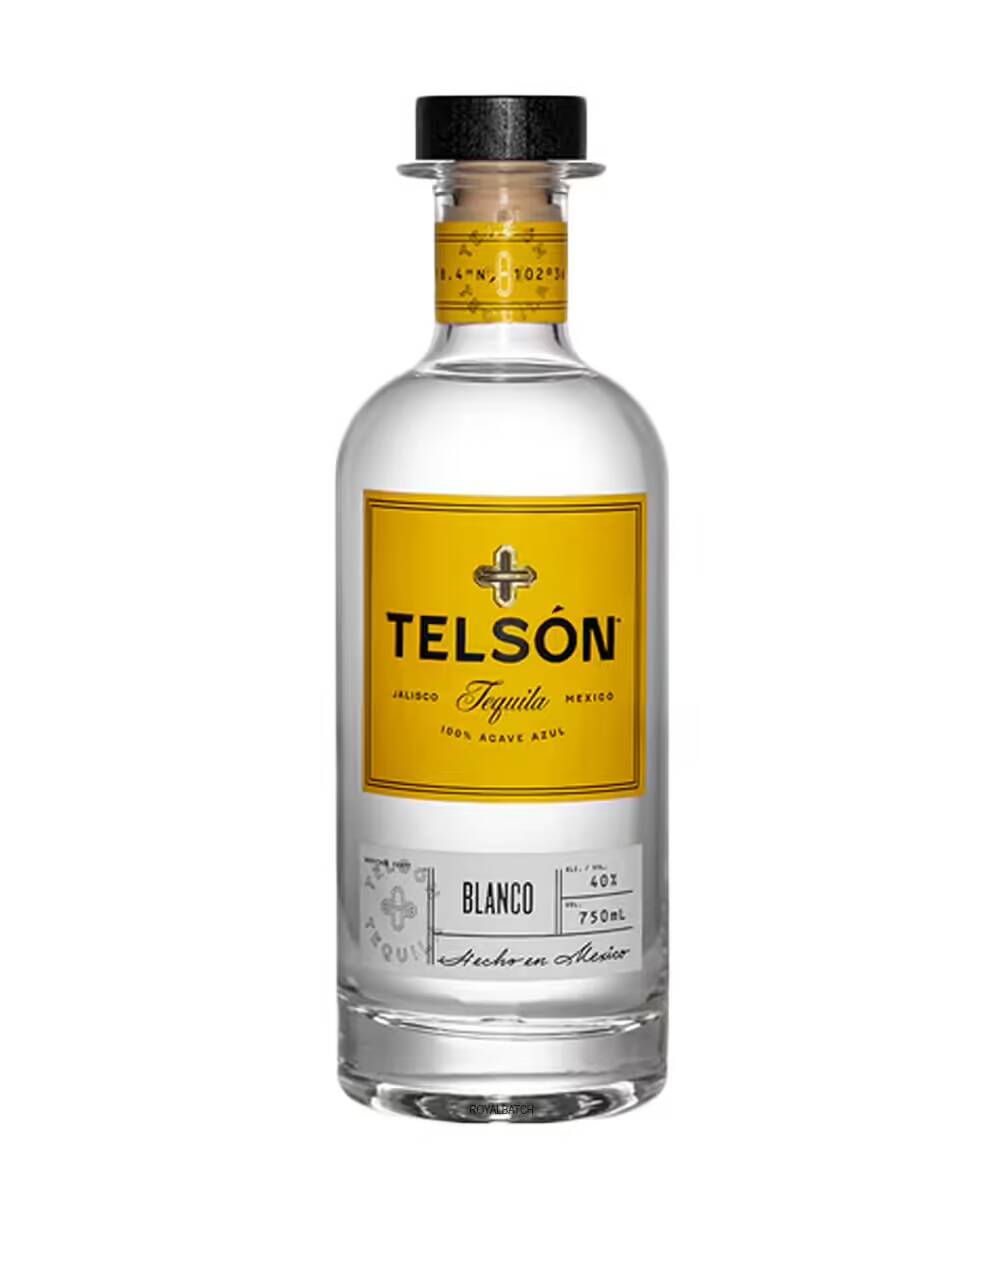 Telson Blanco Tequila